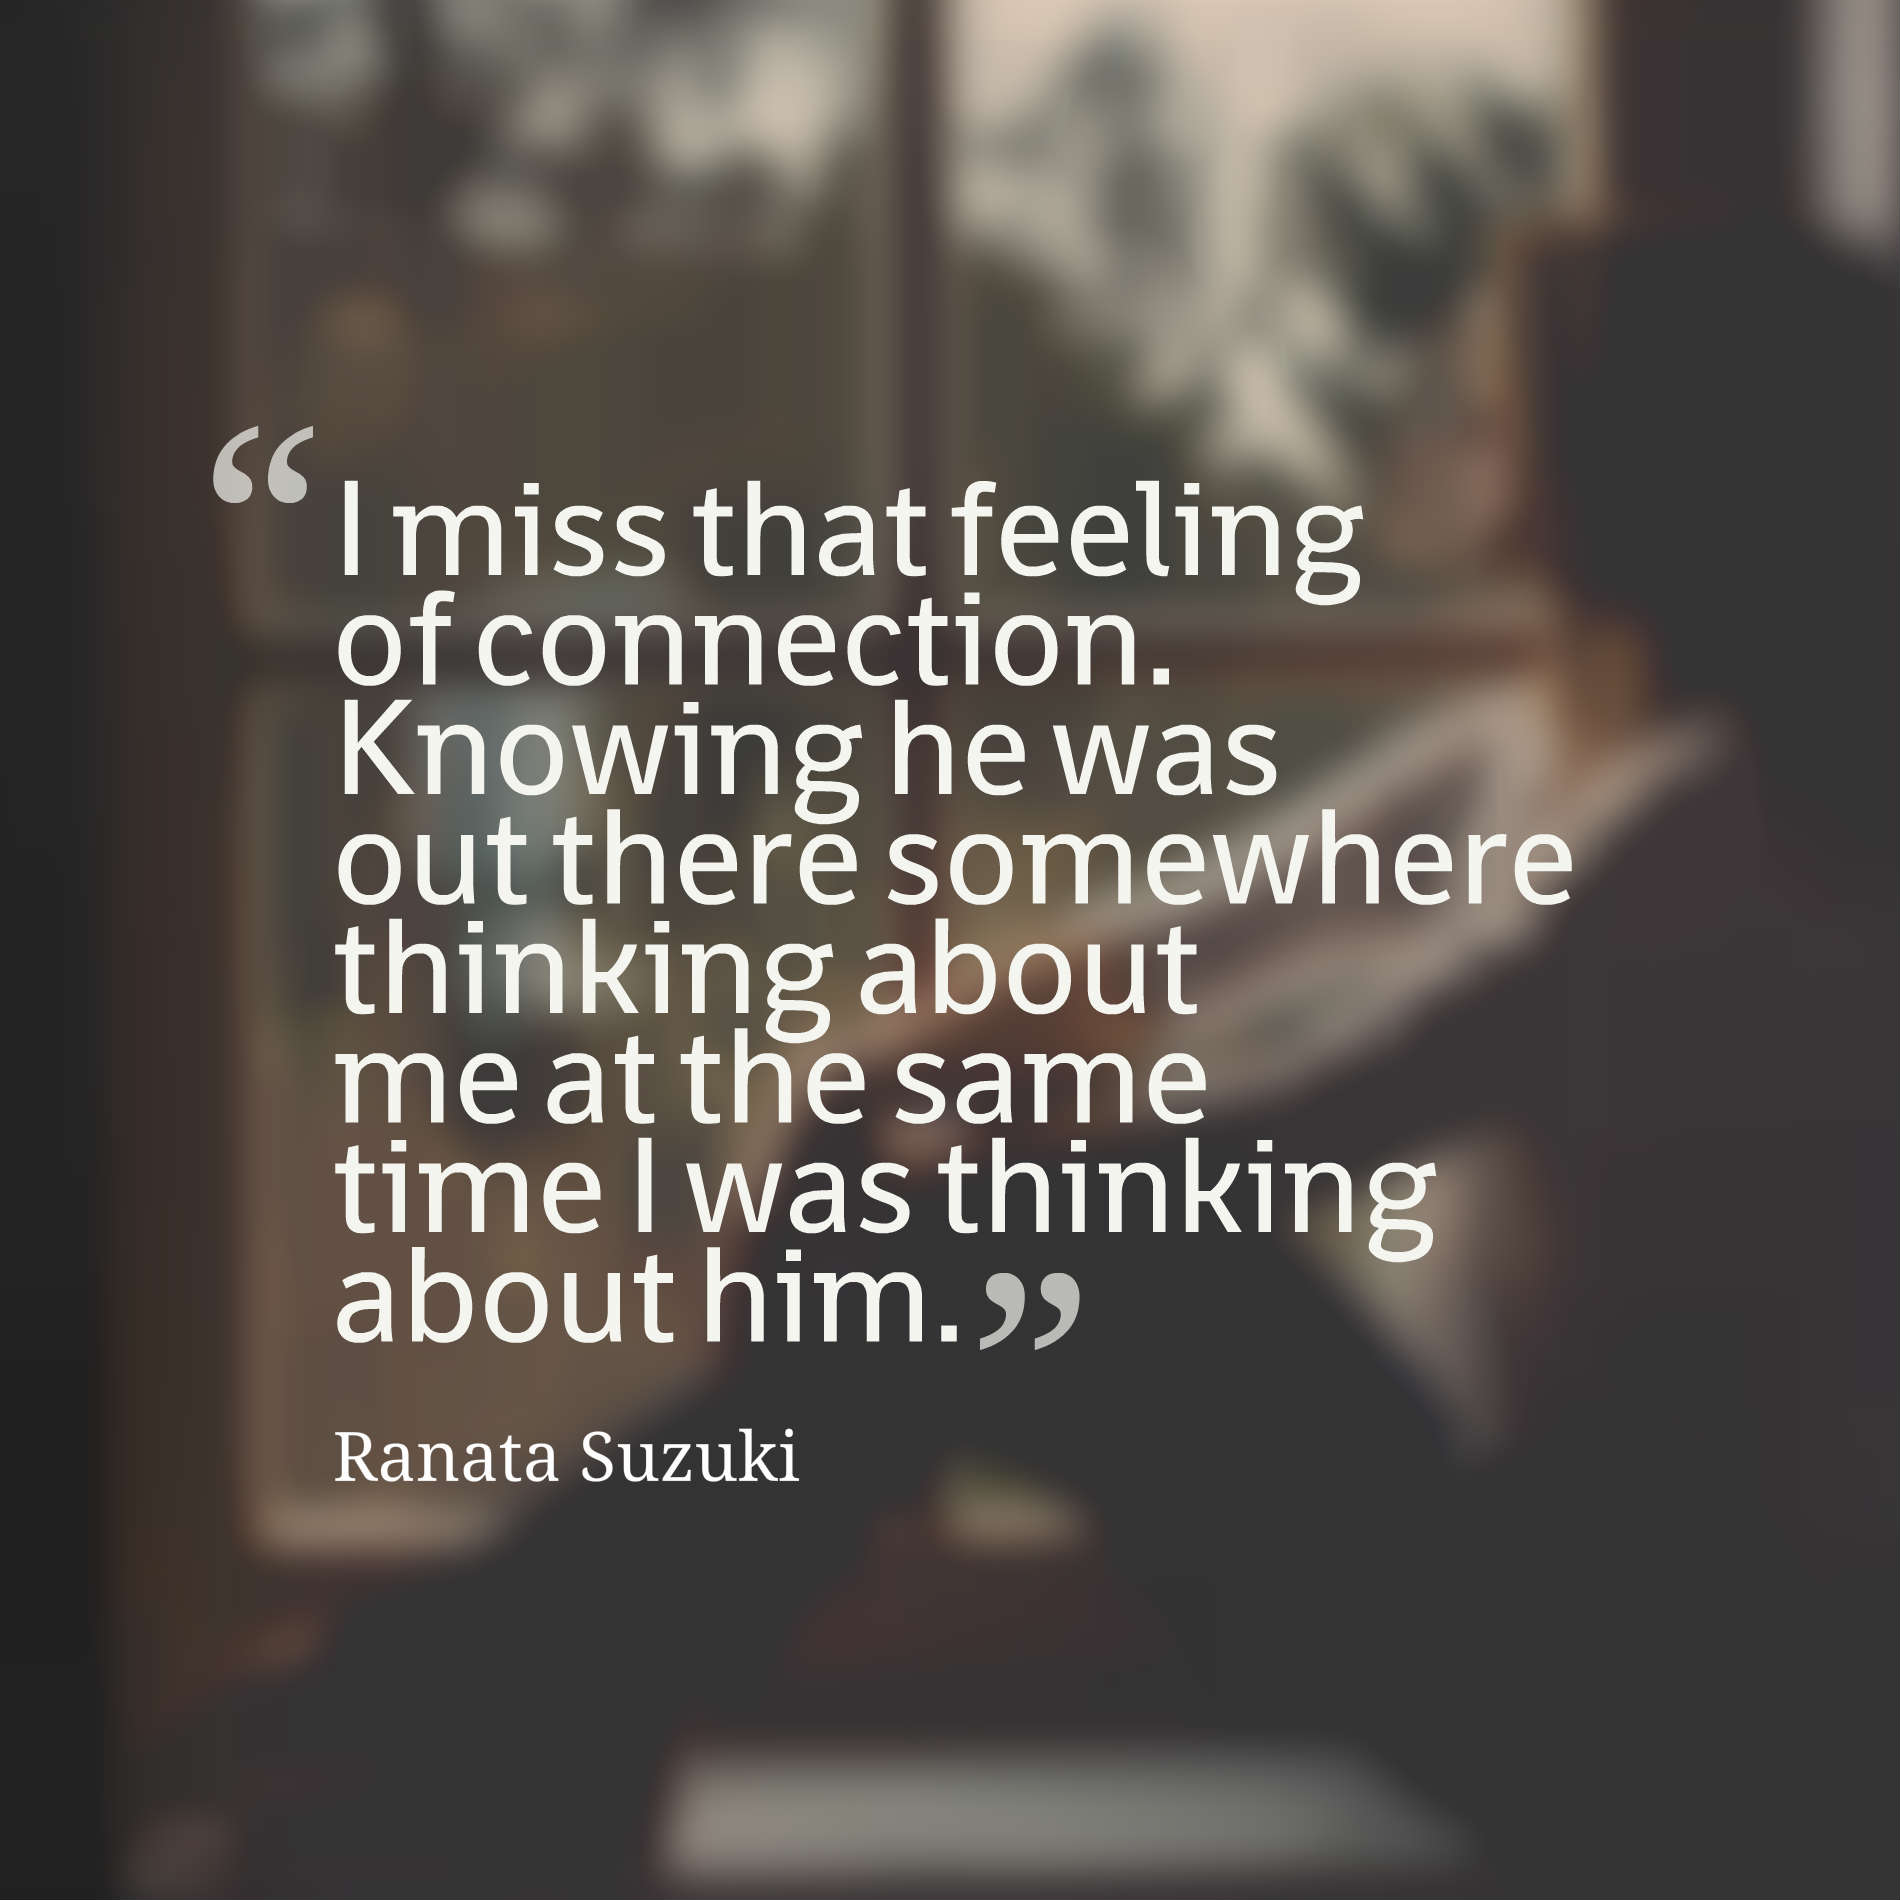 I miss that feeling of connection.Knowing he was out there somewhere thinking about me at the same time I was thinking about him.